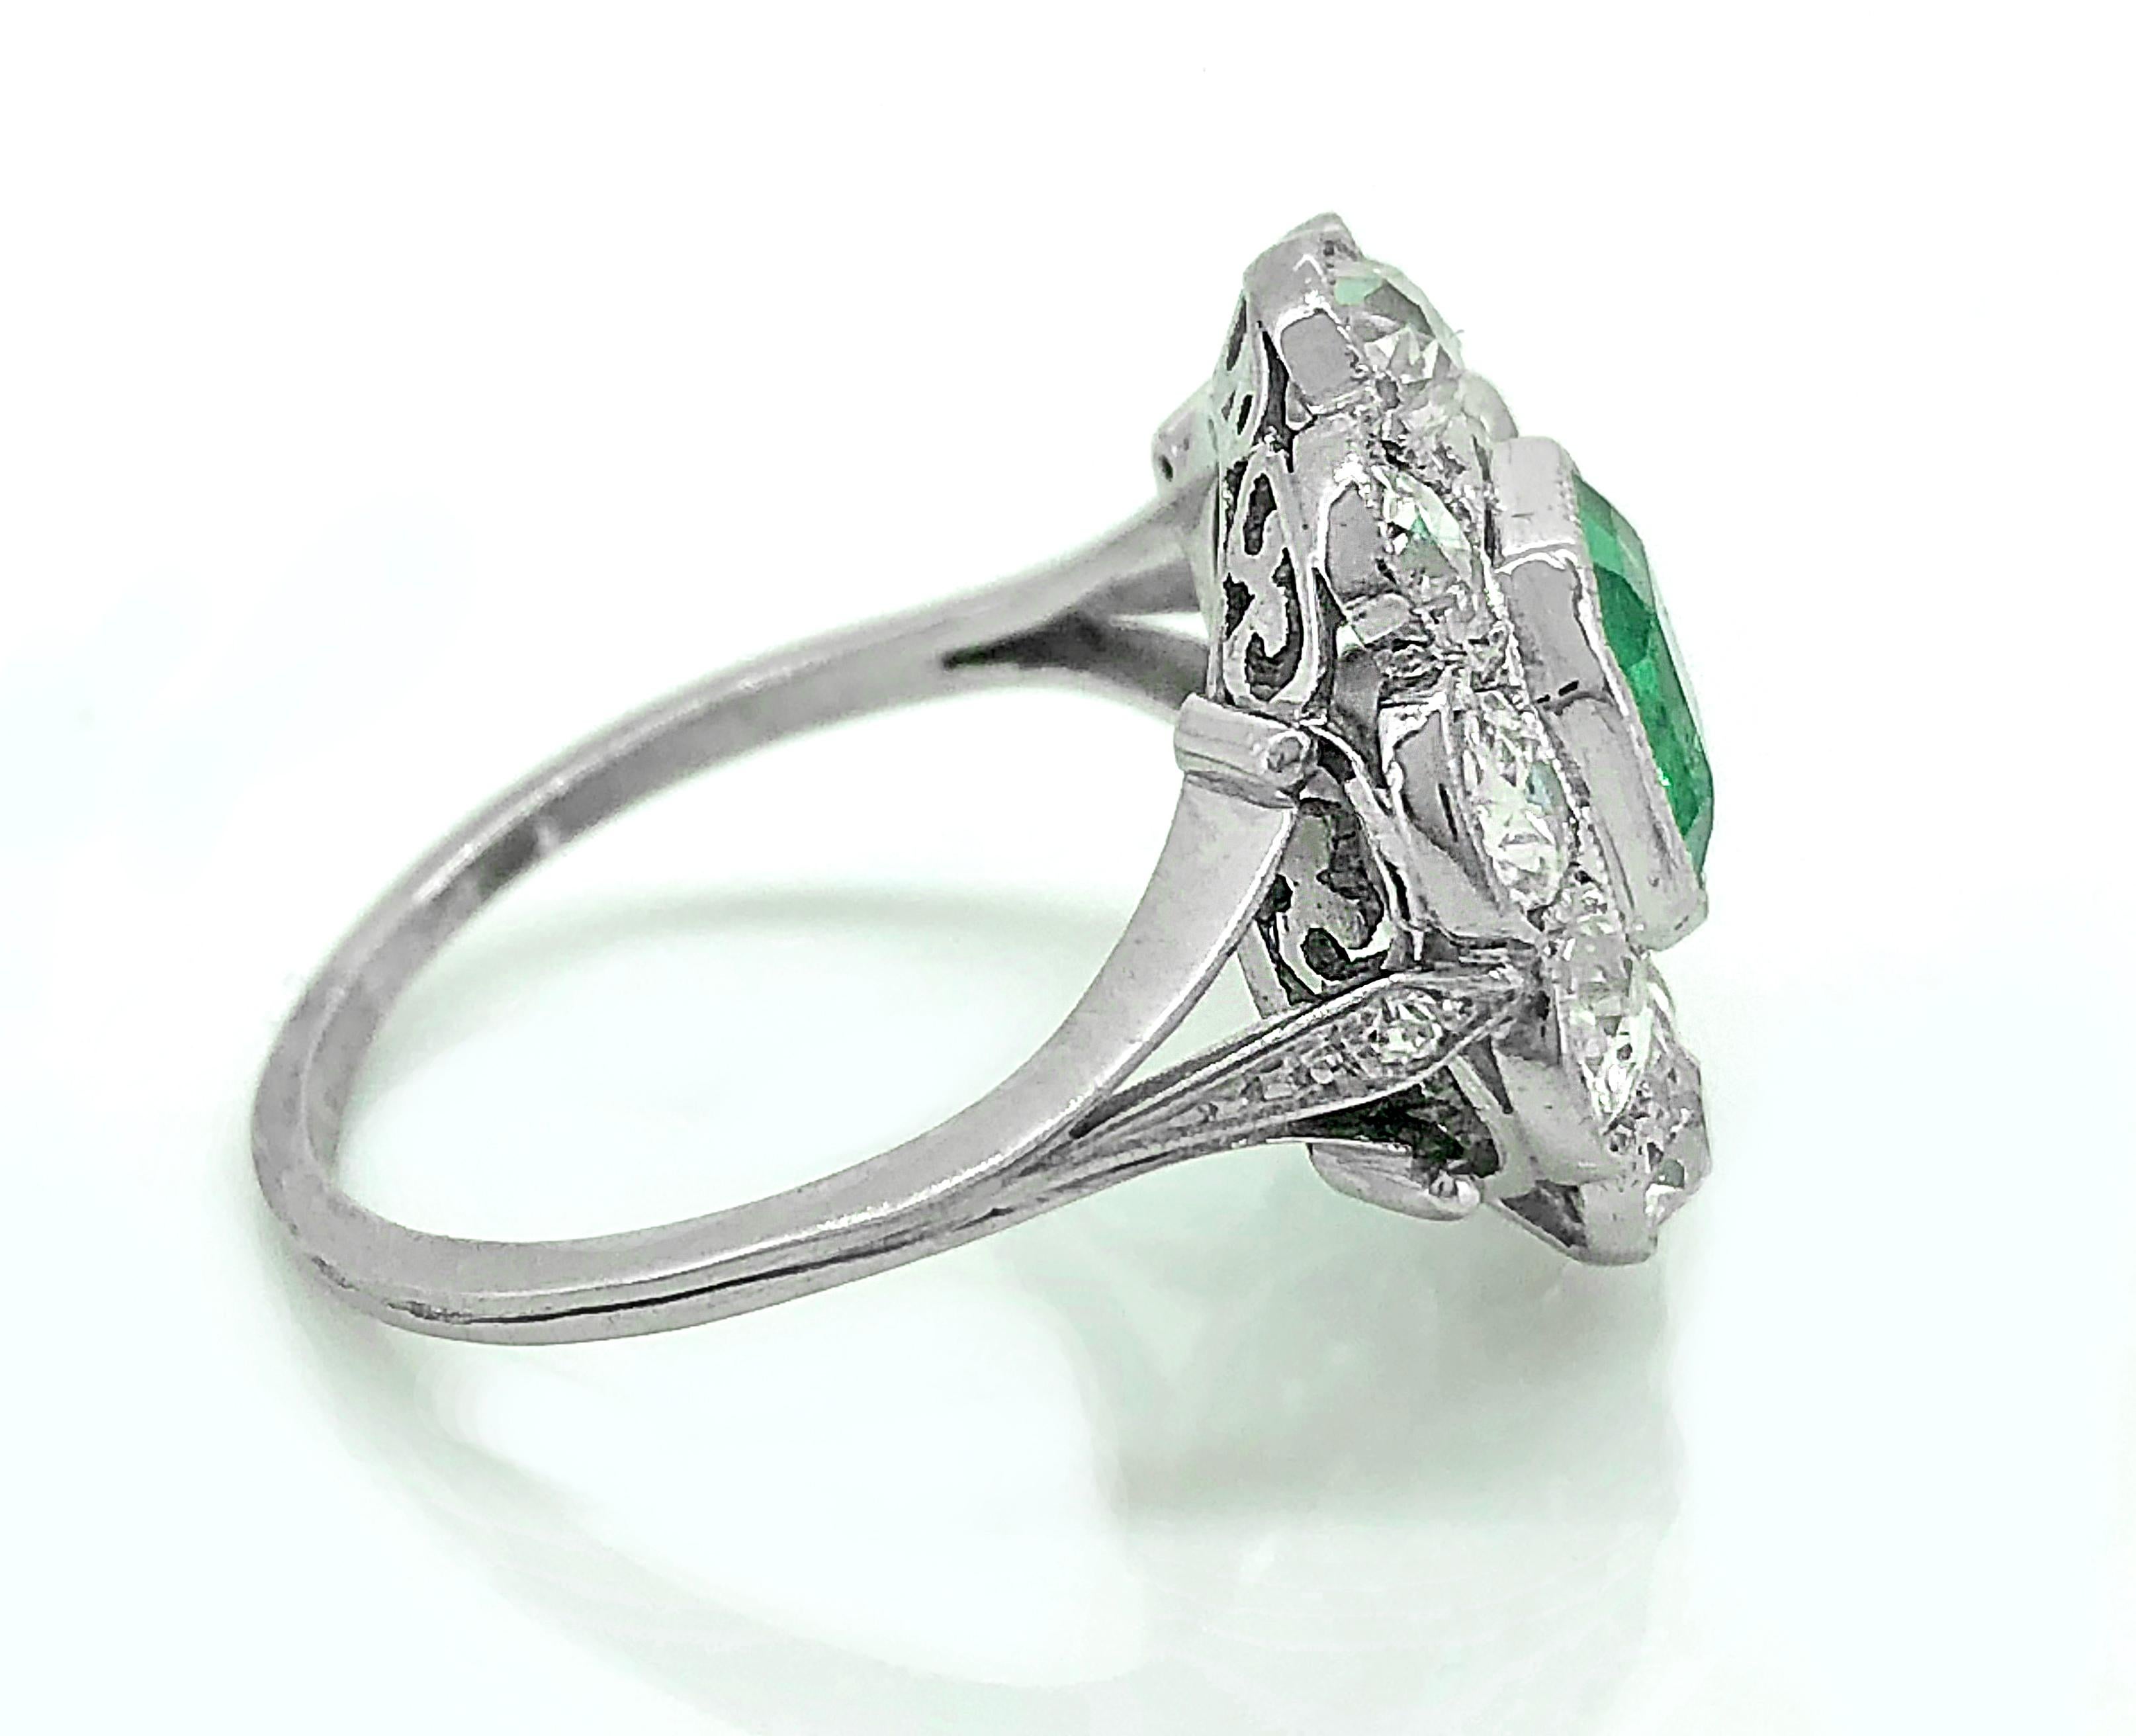 A striking Edwardian emerald and diamond Antique engagement or fashion ring featuring a natural antique square cut green emerald weighing .75ct. Apx. The emerald is accented with 1.00ct. Apx. T.W. of old European and single cut diamonds with SI1-I1